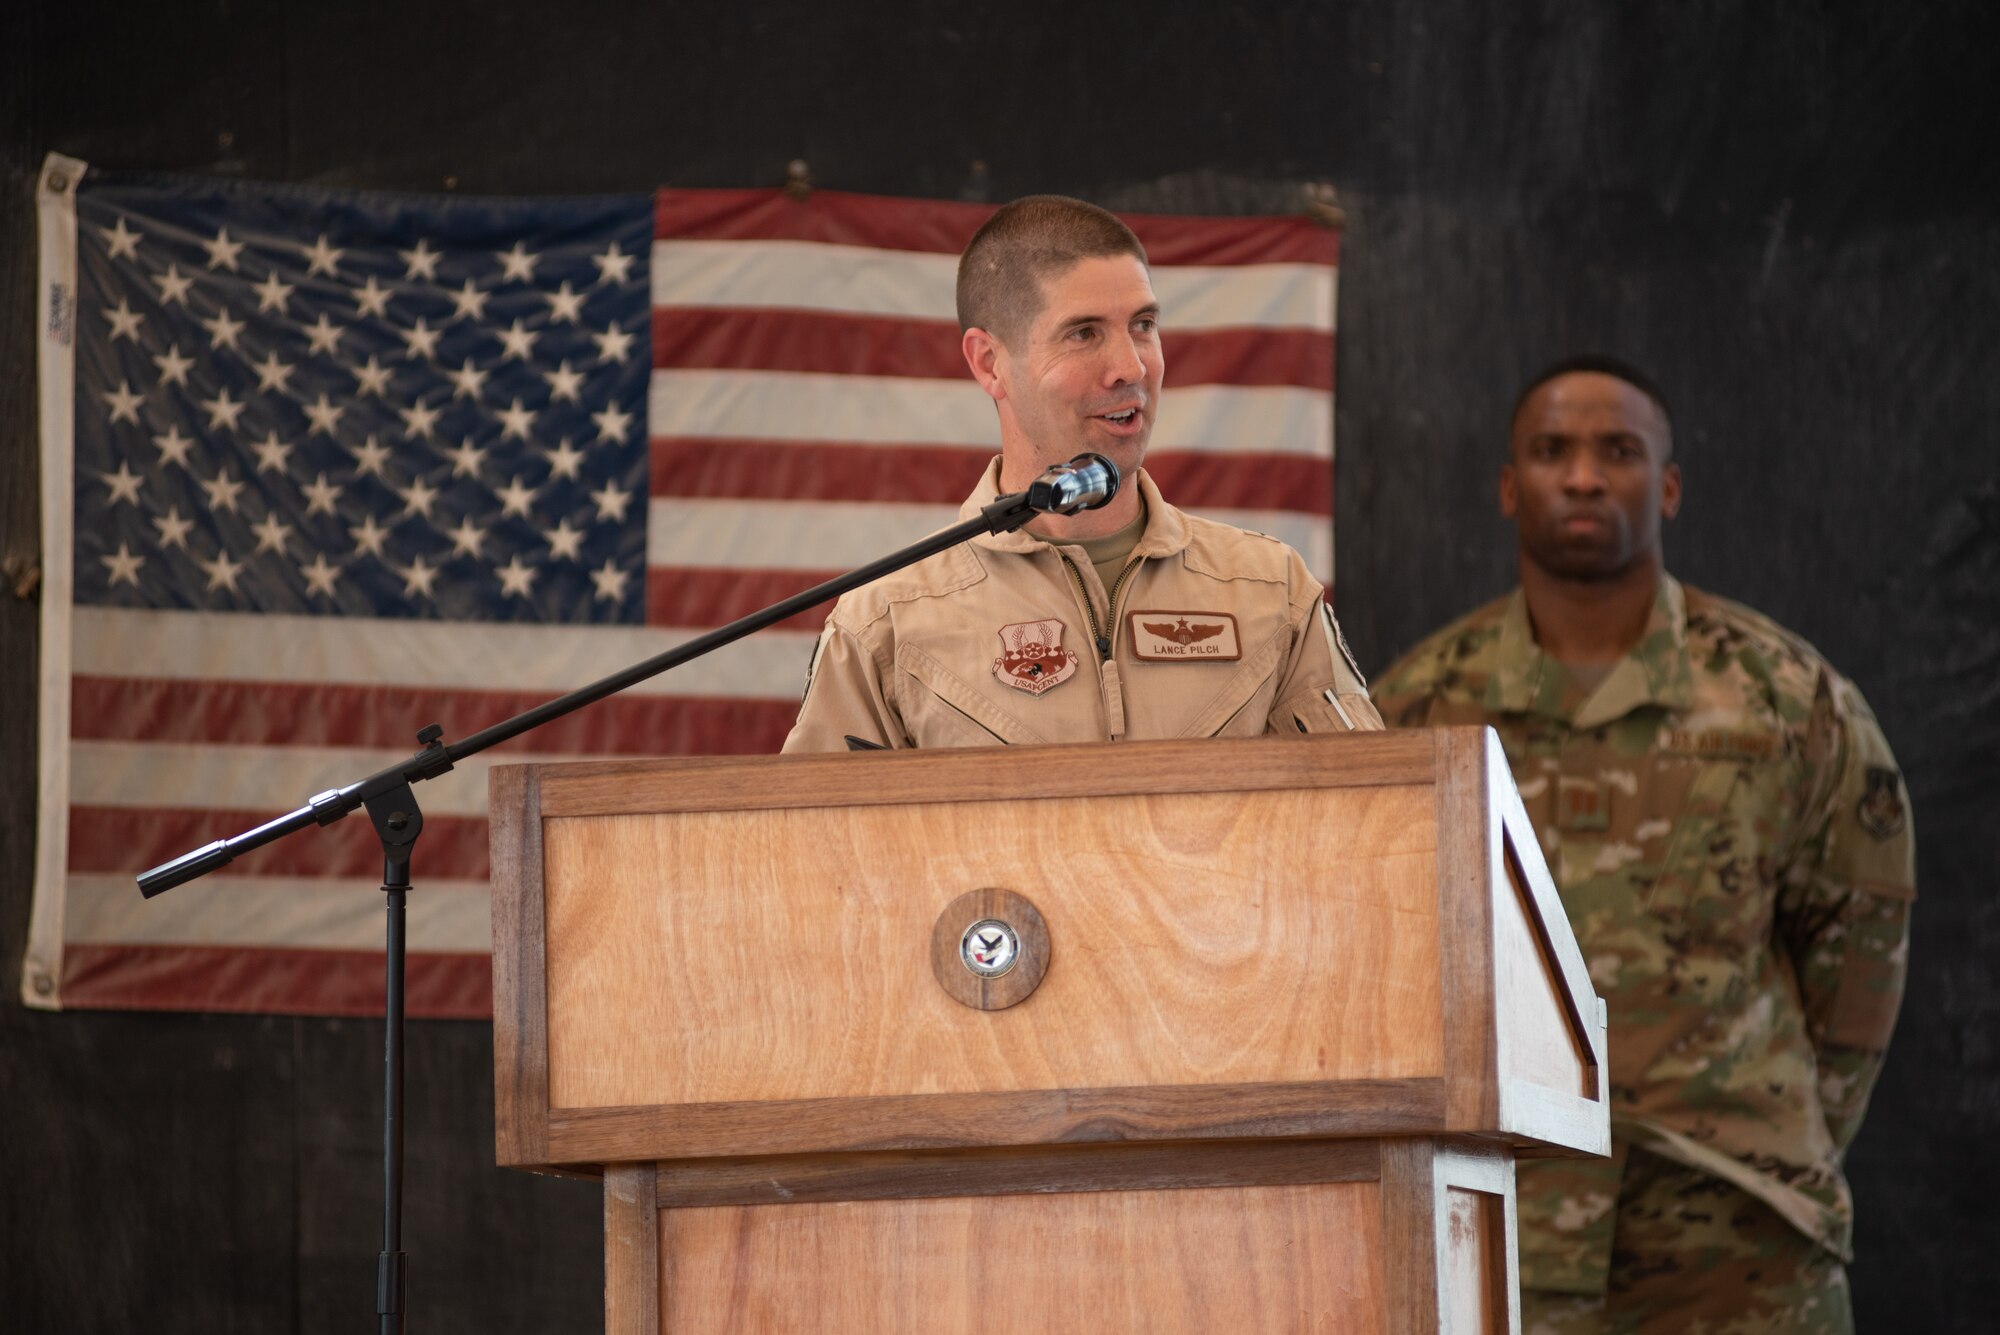 Brig. Gen. Lance Pilch, speaks during the 380th Air Expeditionary Wing Change of Command ceremony July 1, 2019, at Al Dhafra Air Base, United Arab Emirates